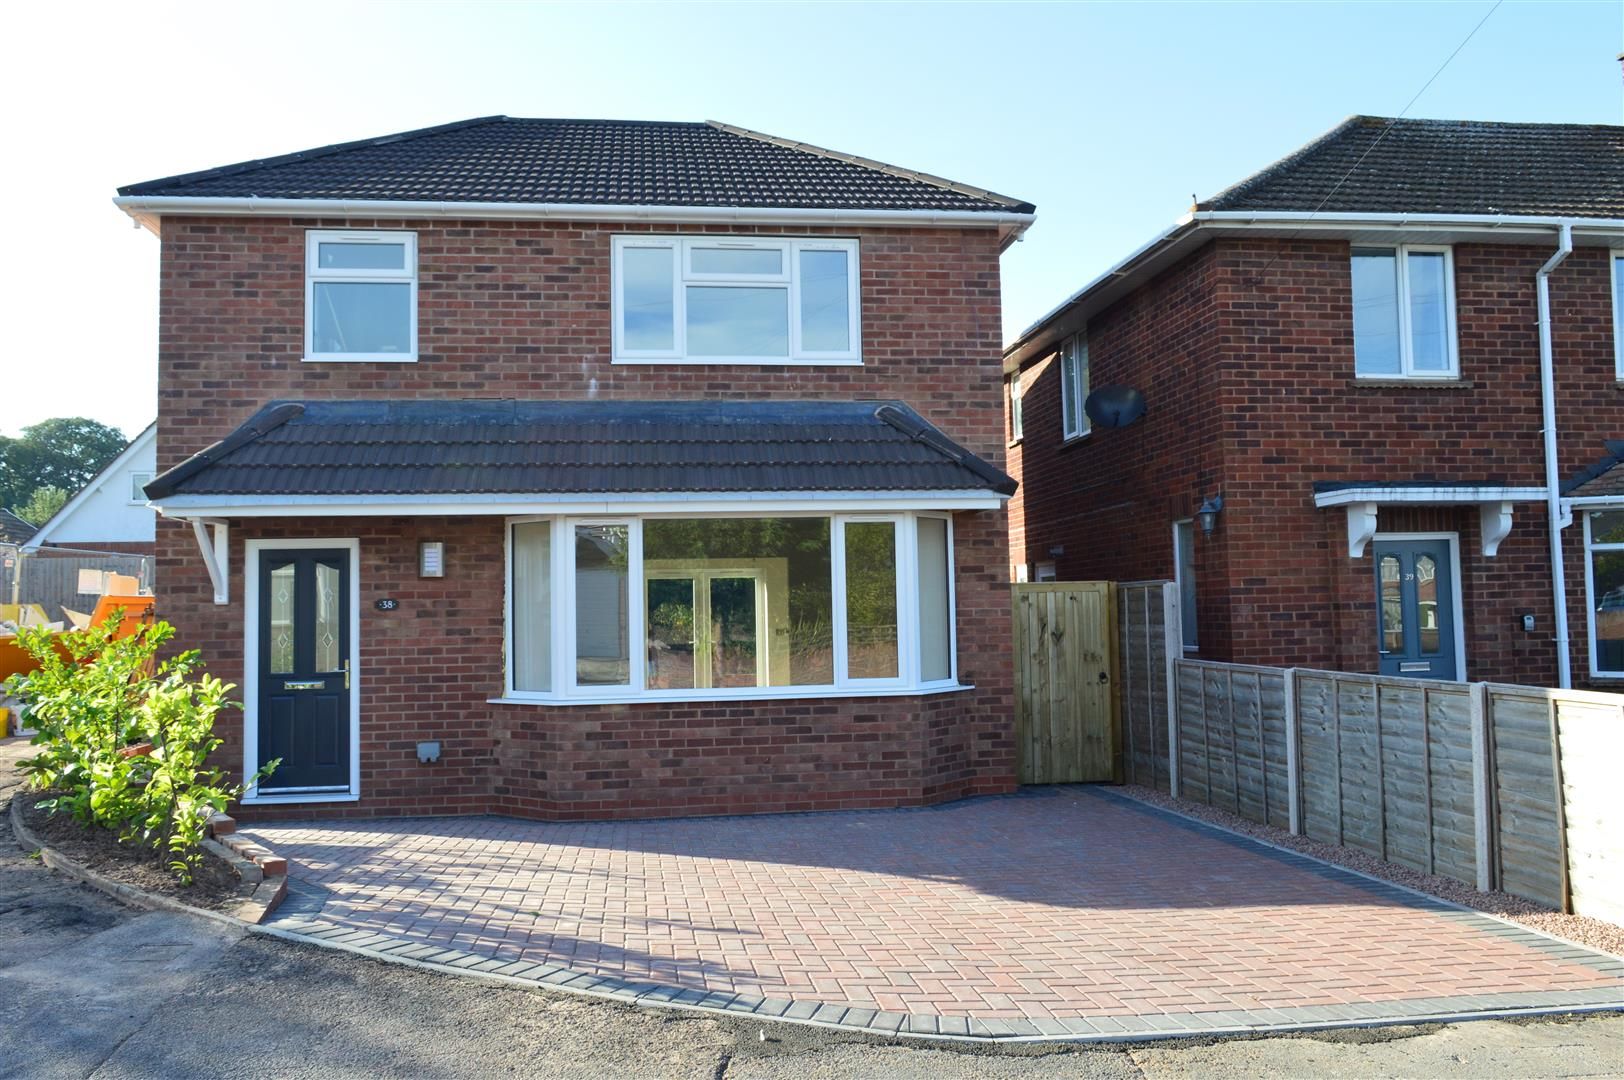 3 bed detached for sale 1